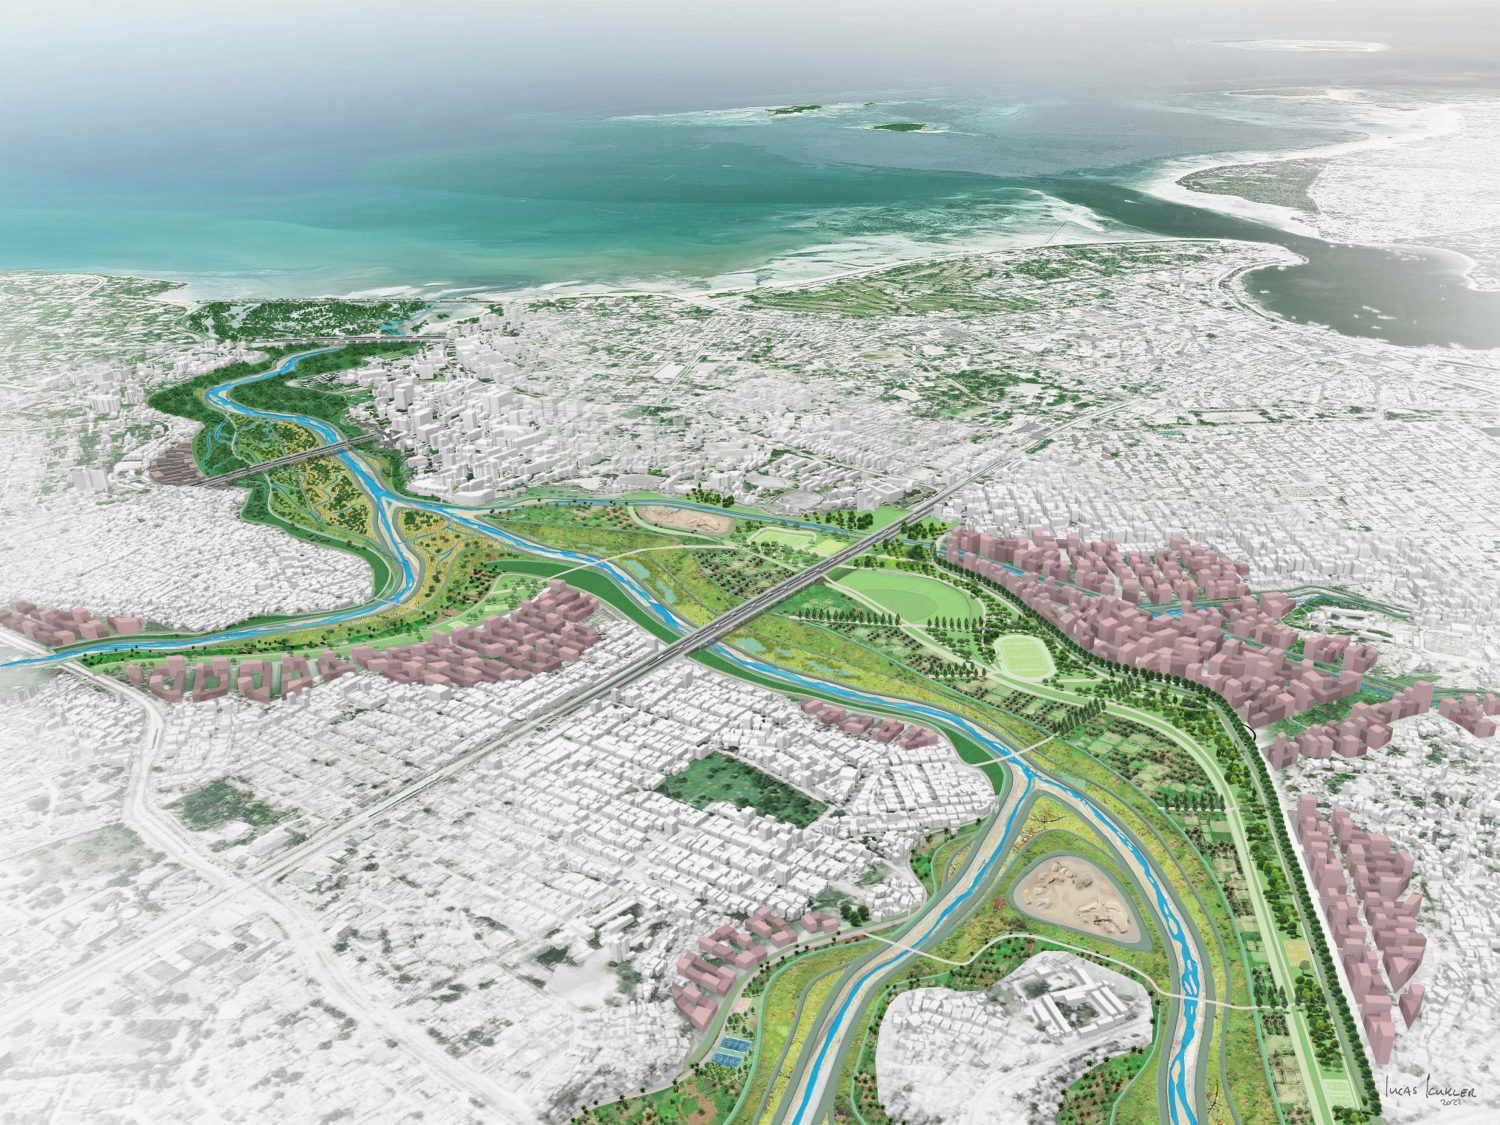 The Lower Msimbazi river area envisioned as the green lungs of the city